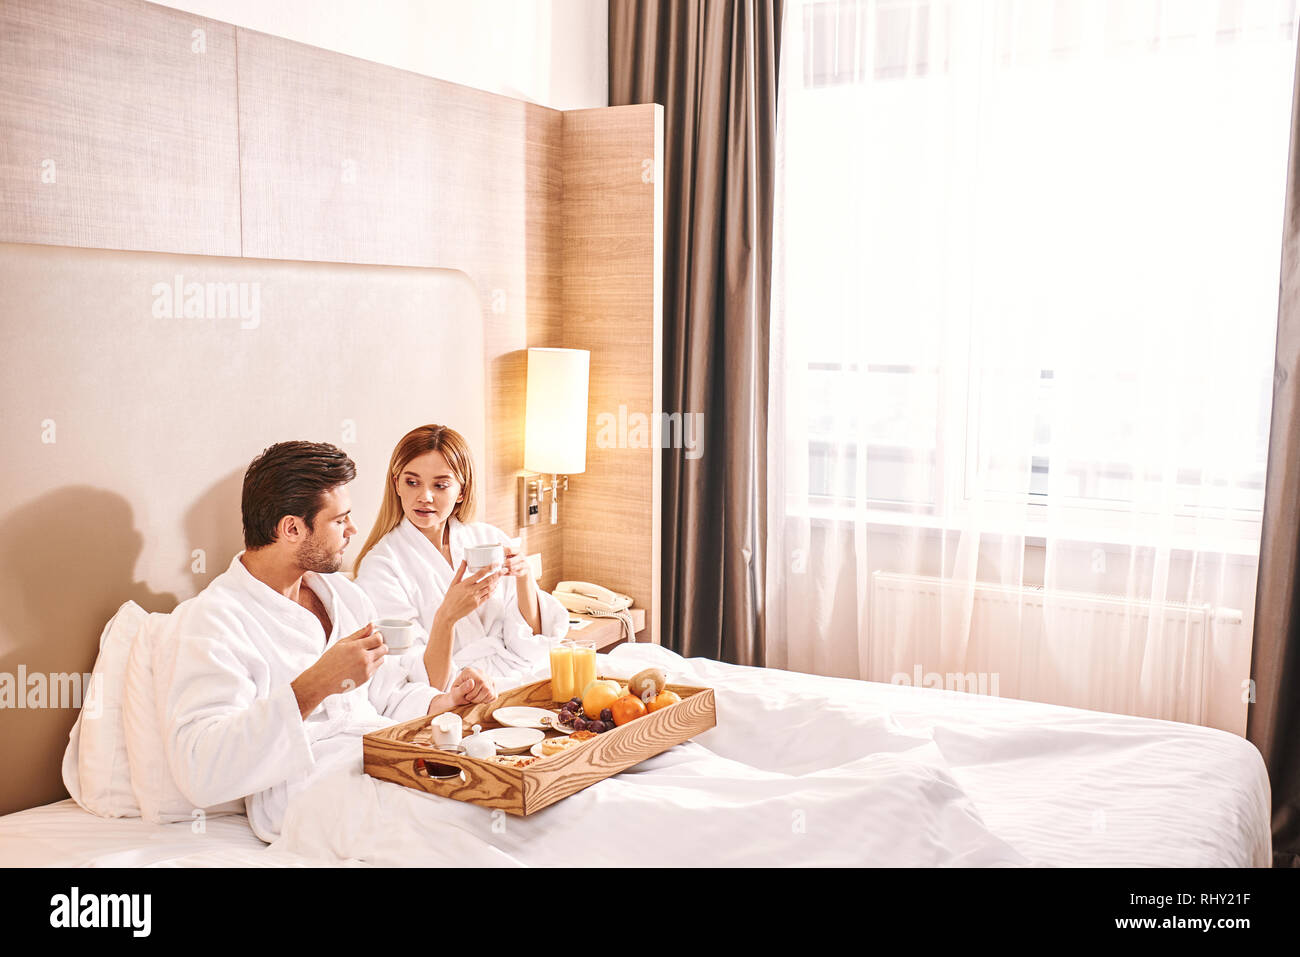 Fresh fruits breakfast. Couple are eating in hotel room bed together. Love story. Stock Photo